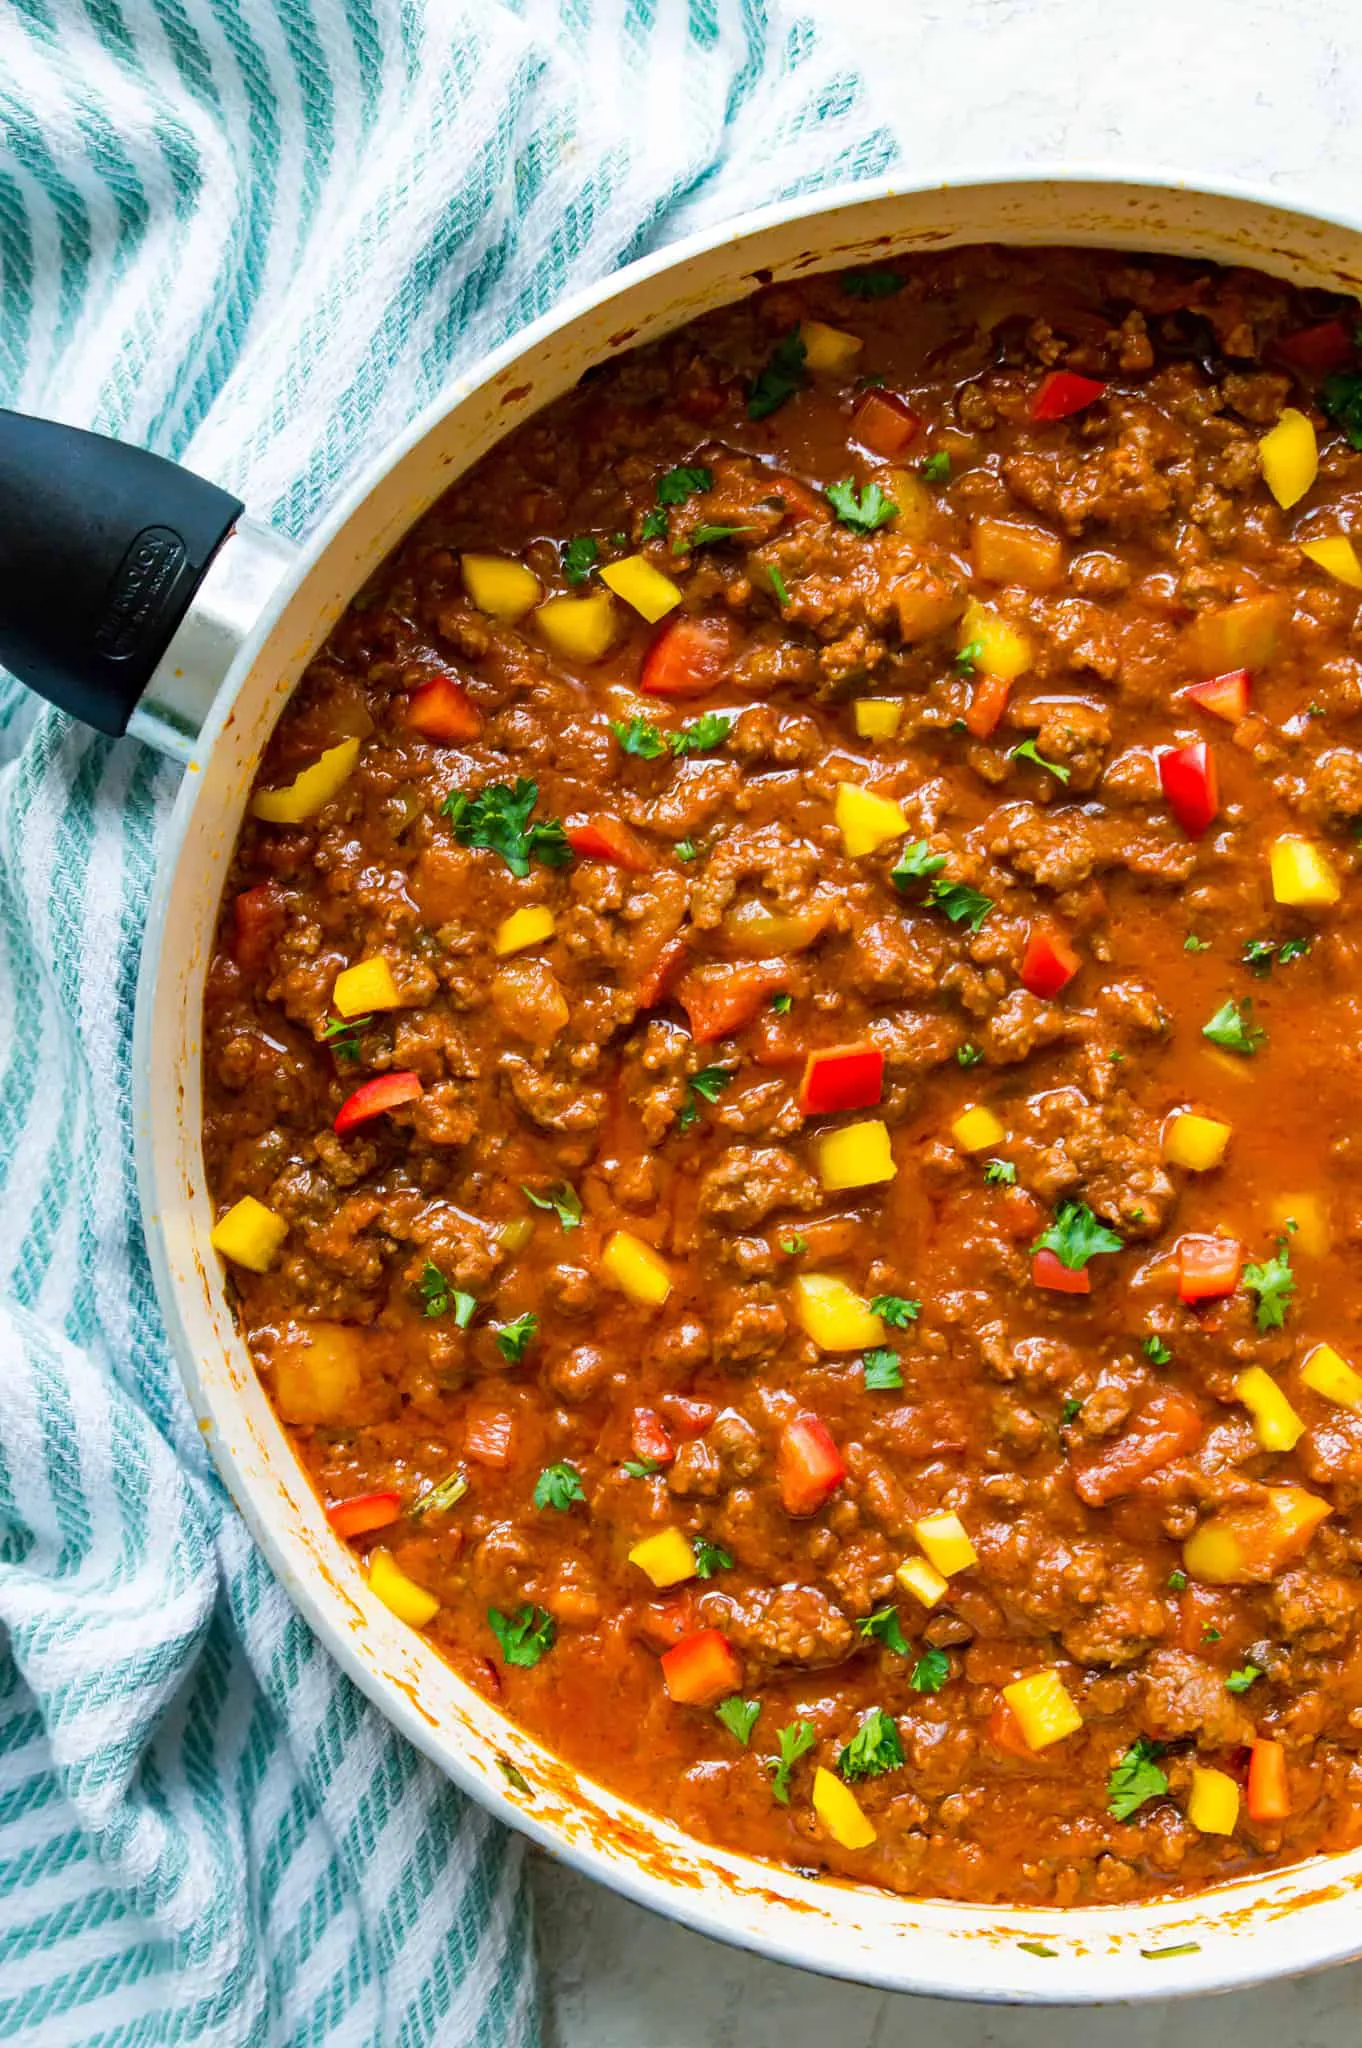 A pan of Whole30 sloppy joes comfort food